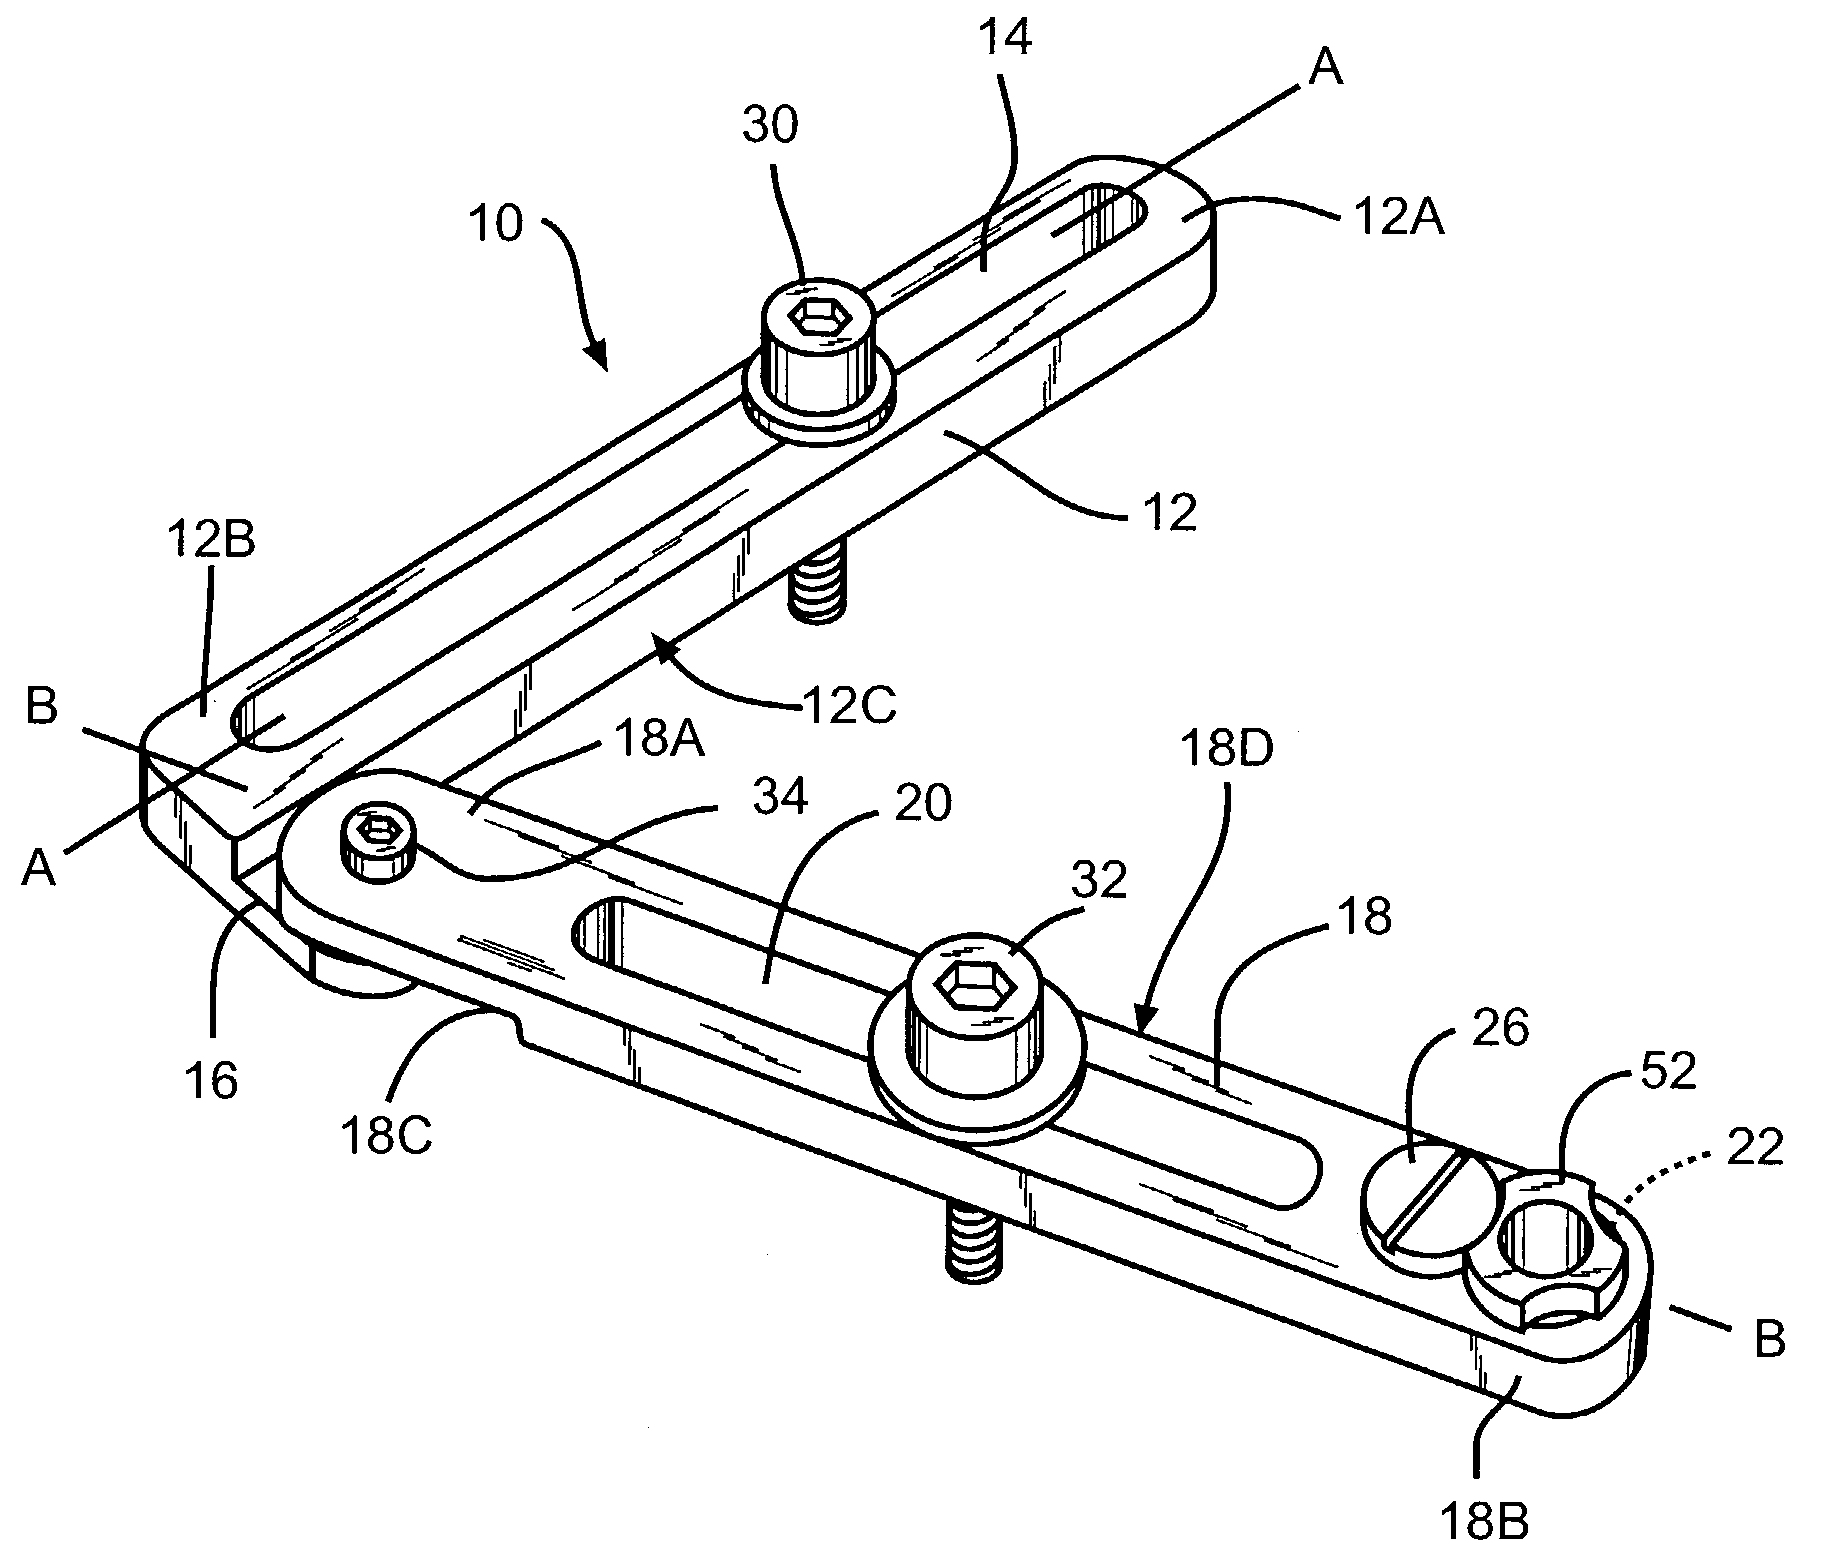 Tool for removing an object from a workpiece